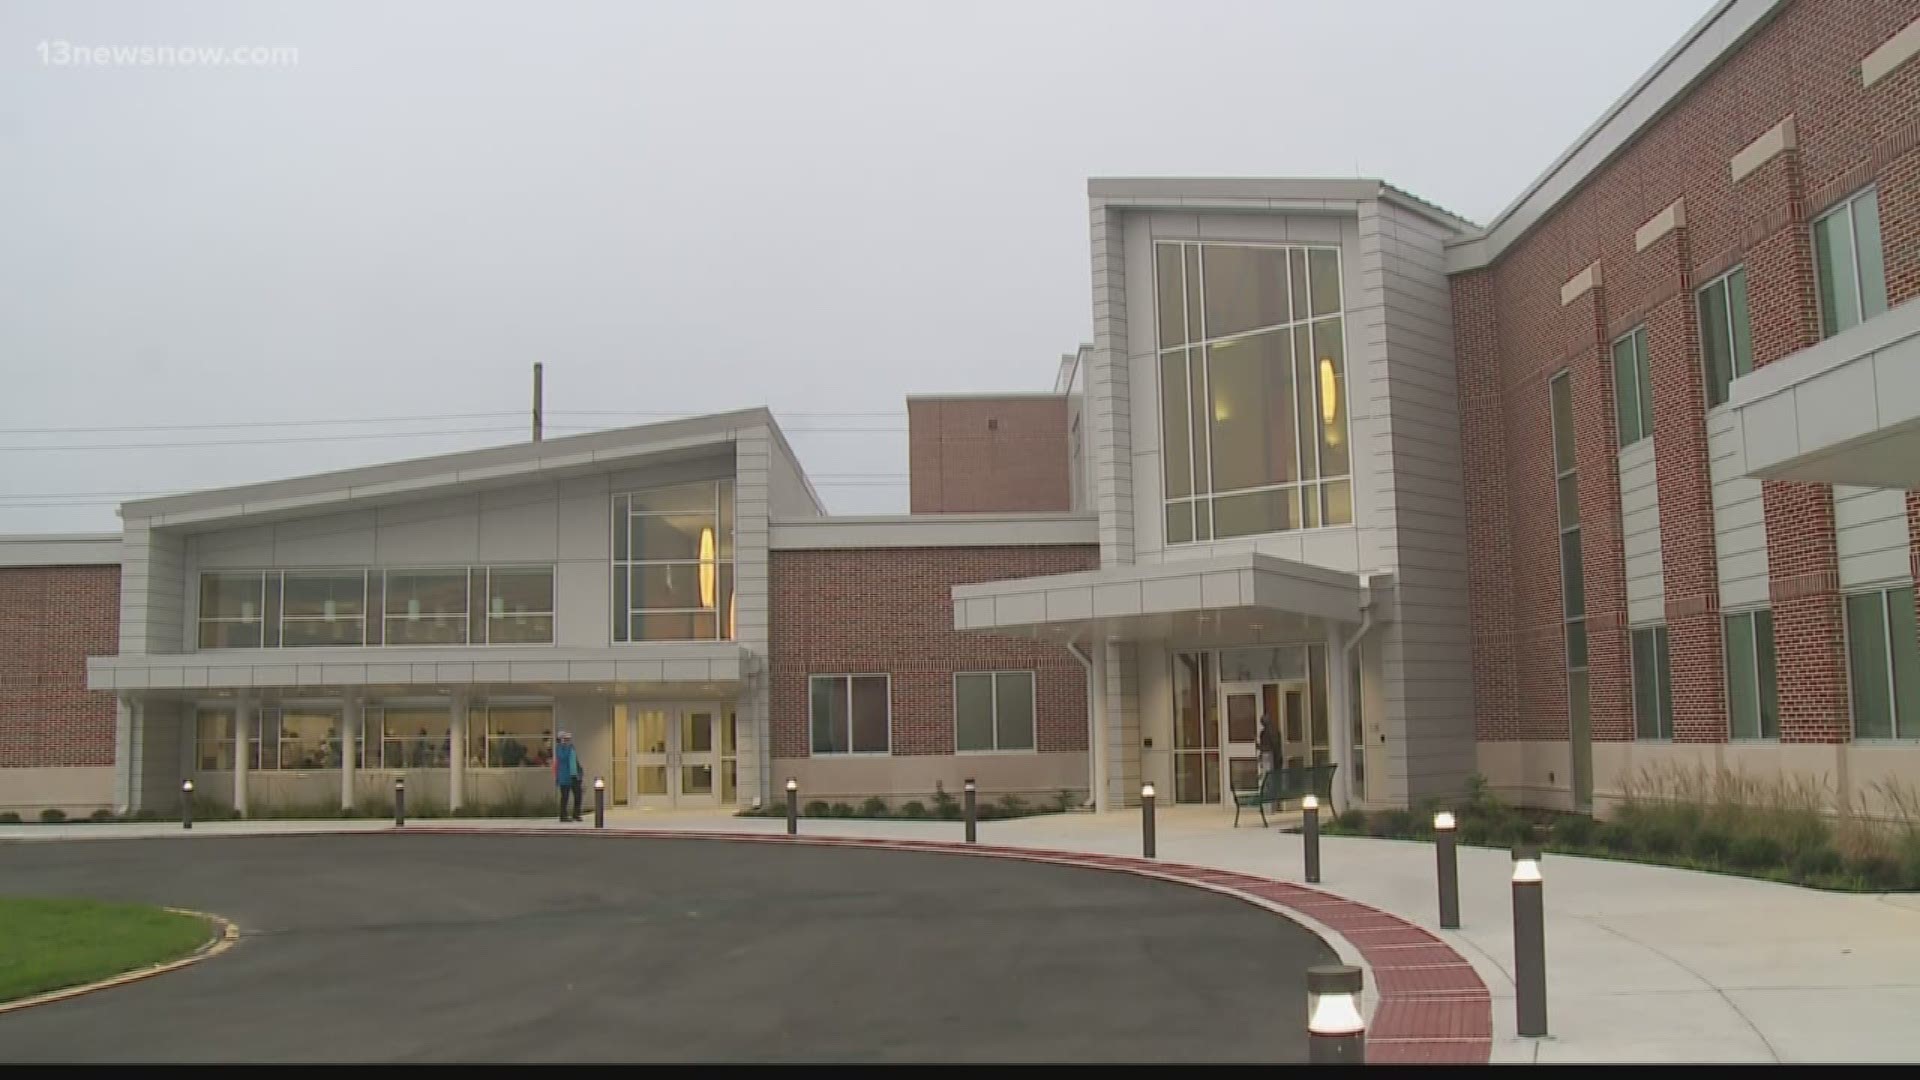 A new housing resource center opened recently in Virginia Beach and now it has a health facility making it a one-stop shop for people who don't have a permanent place to stay. 13News Now reporter Ali Weatherton has more on what the health facility means t